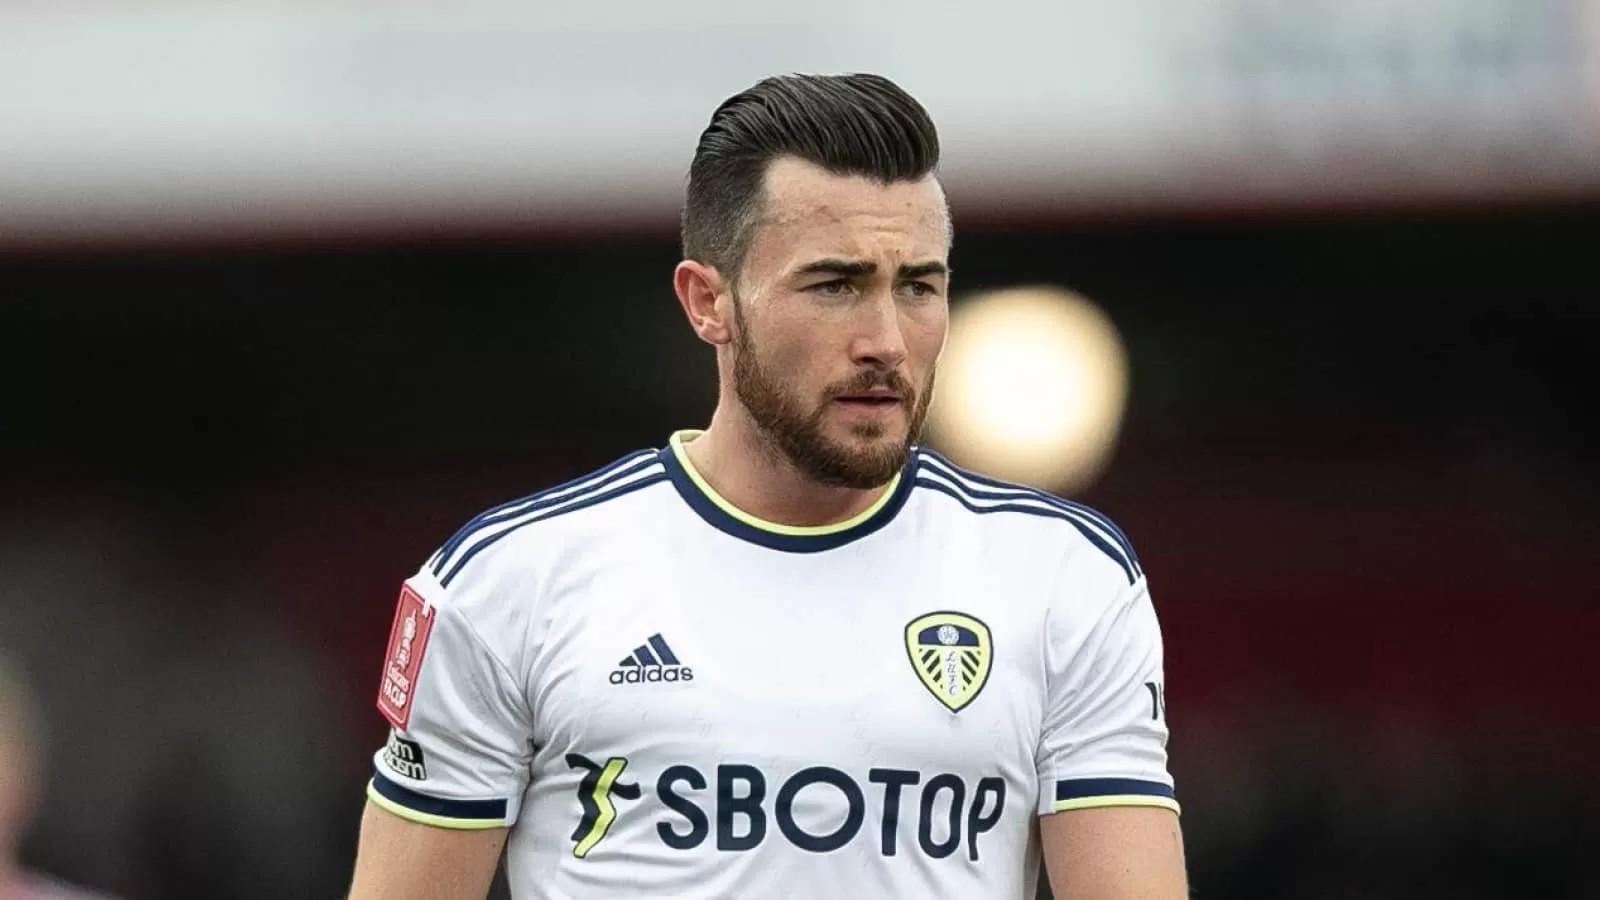 Leeds deadline day antics could bite them, as star may still leave after January exit was blocked